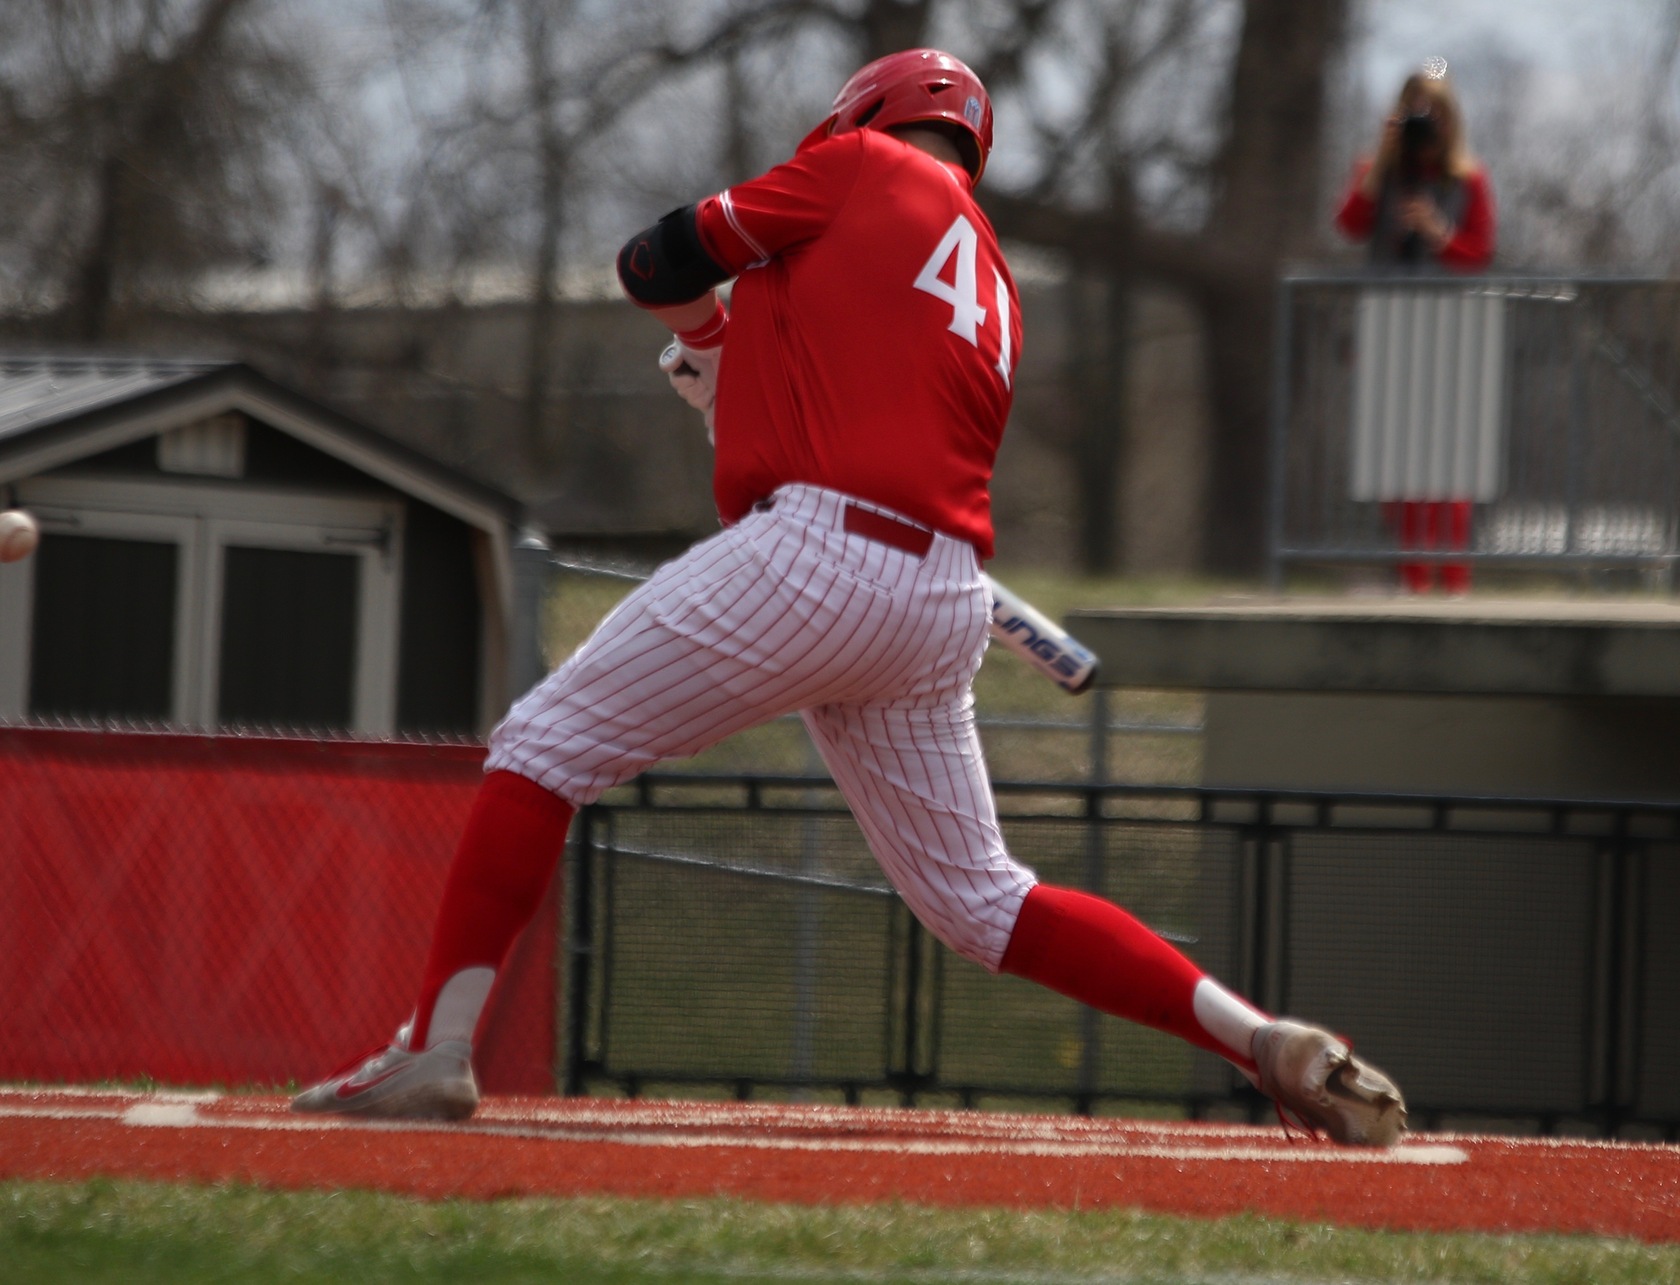 Junior Jack Siefert blasted a pair of homers in game one on Saturday as the Tigers posted their second-straight NCAC DH sweep, this time over visiting Hiram